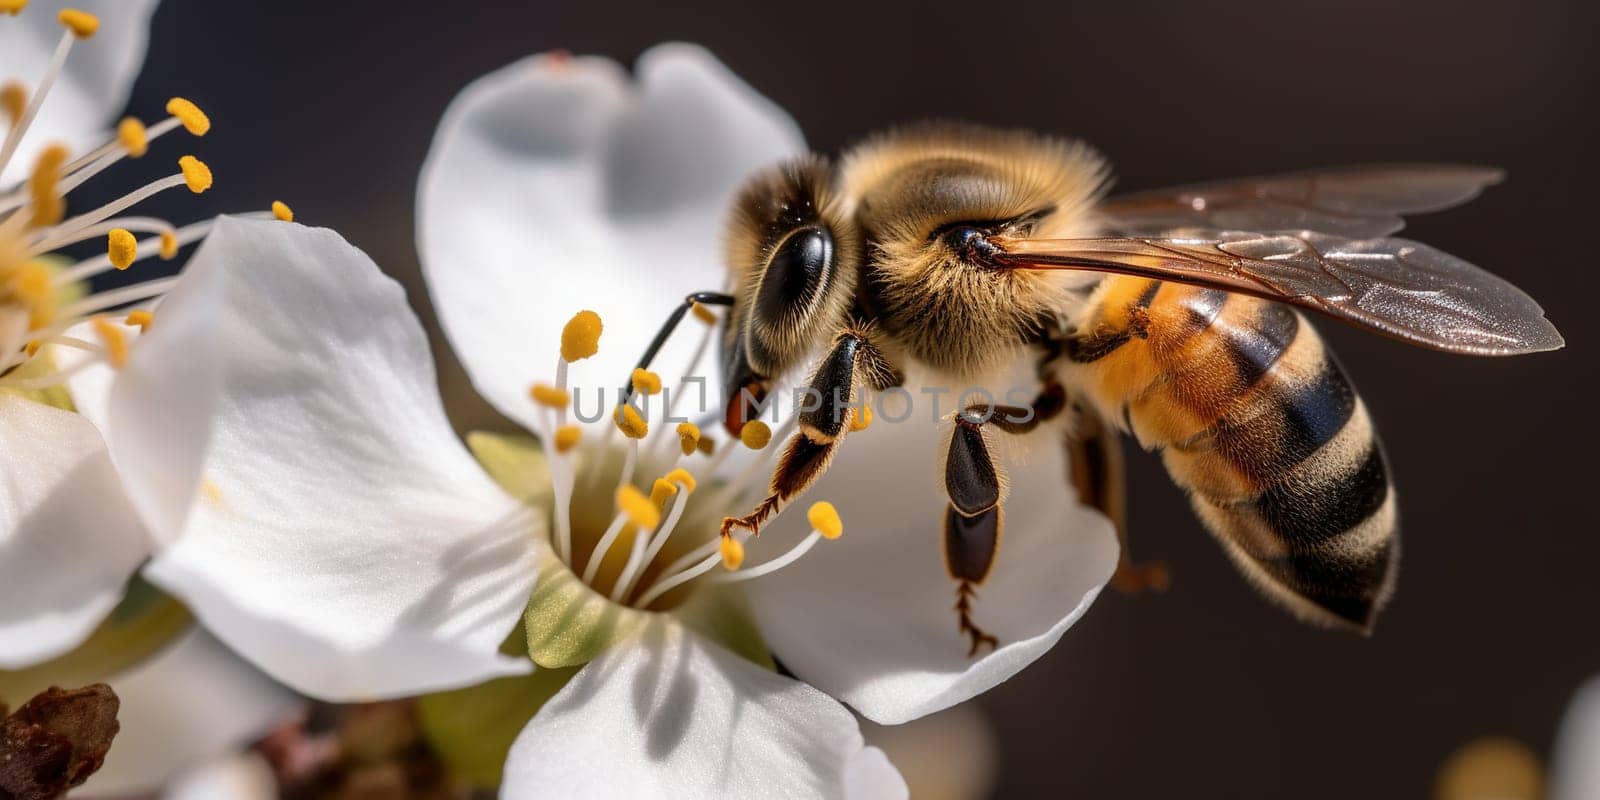 Close-up of a bee collecting pollen on a white flower with blurred background